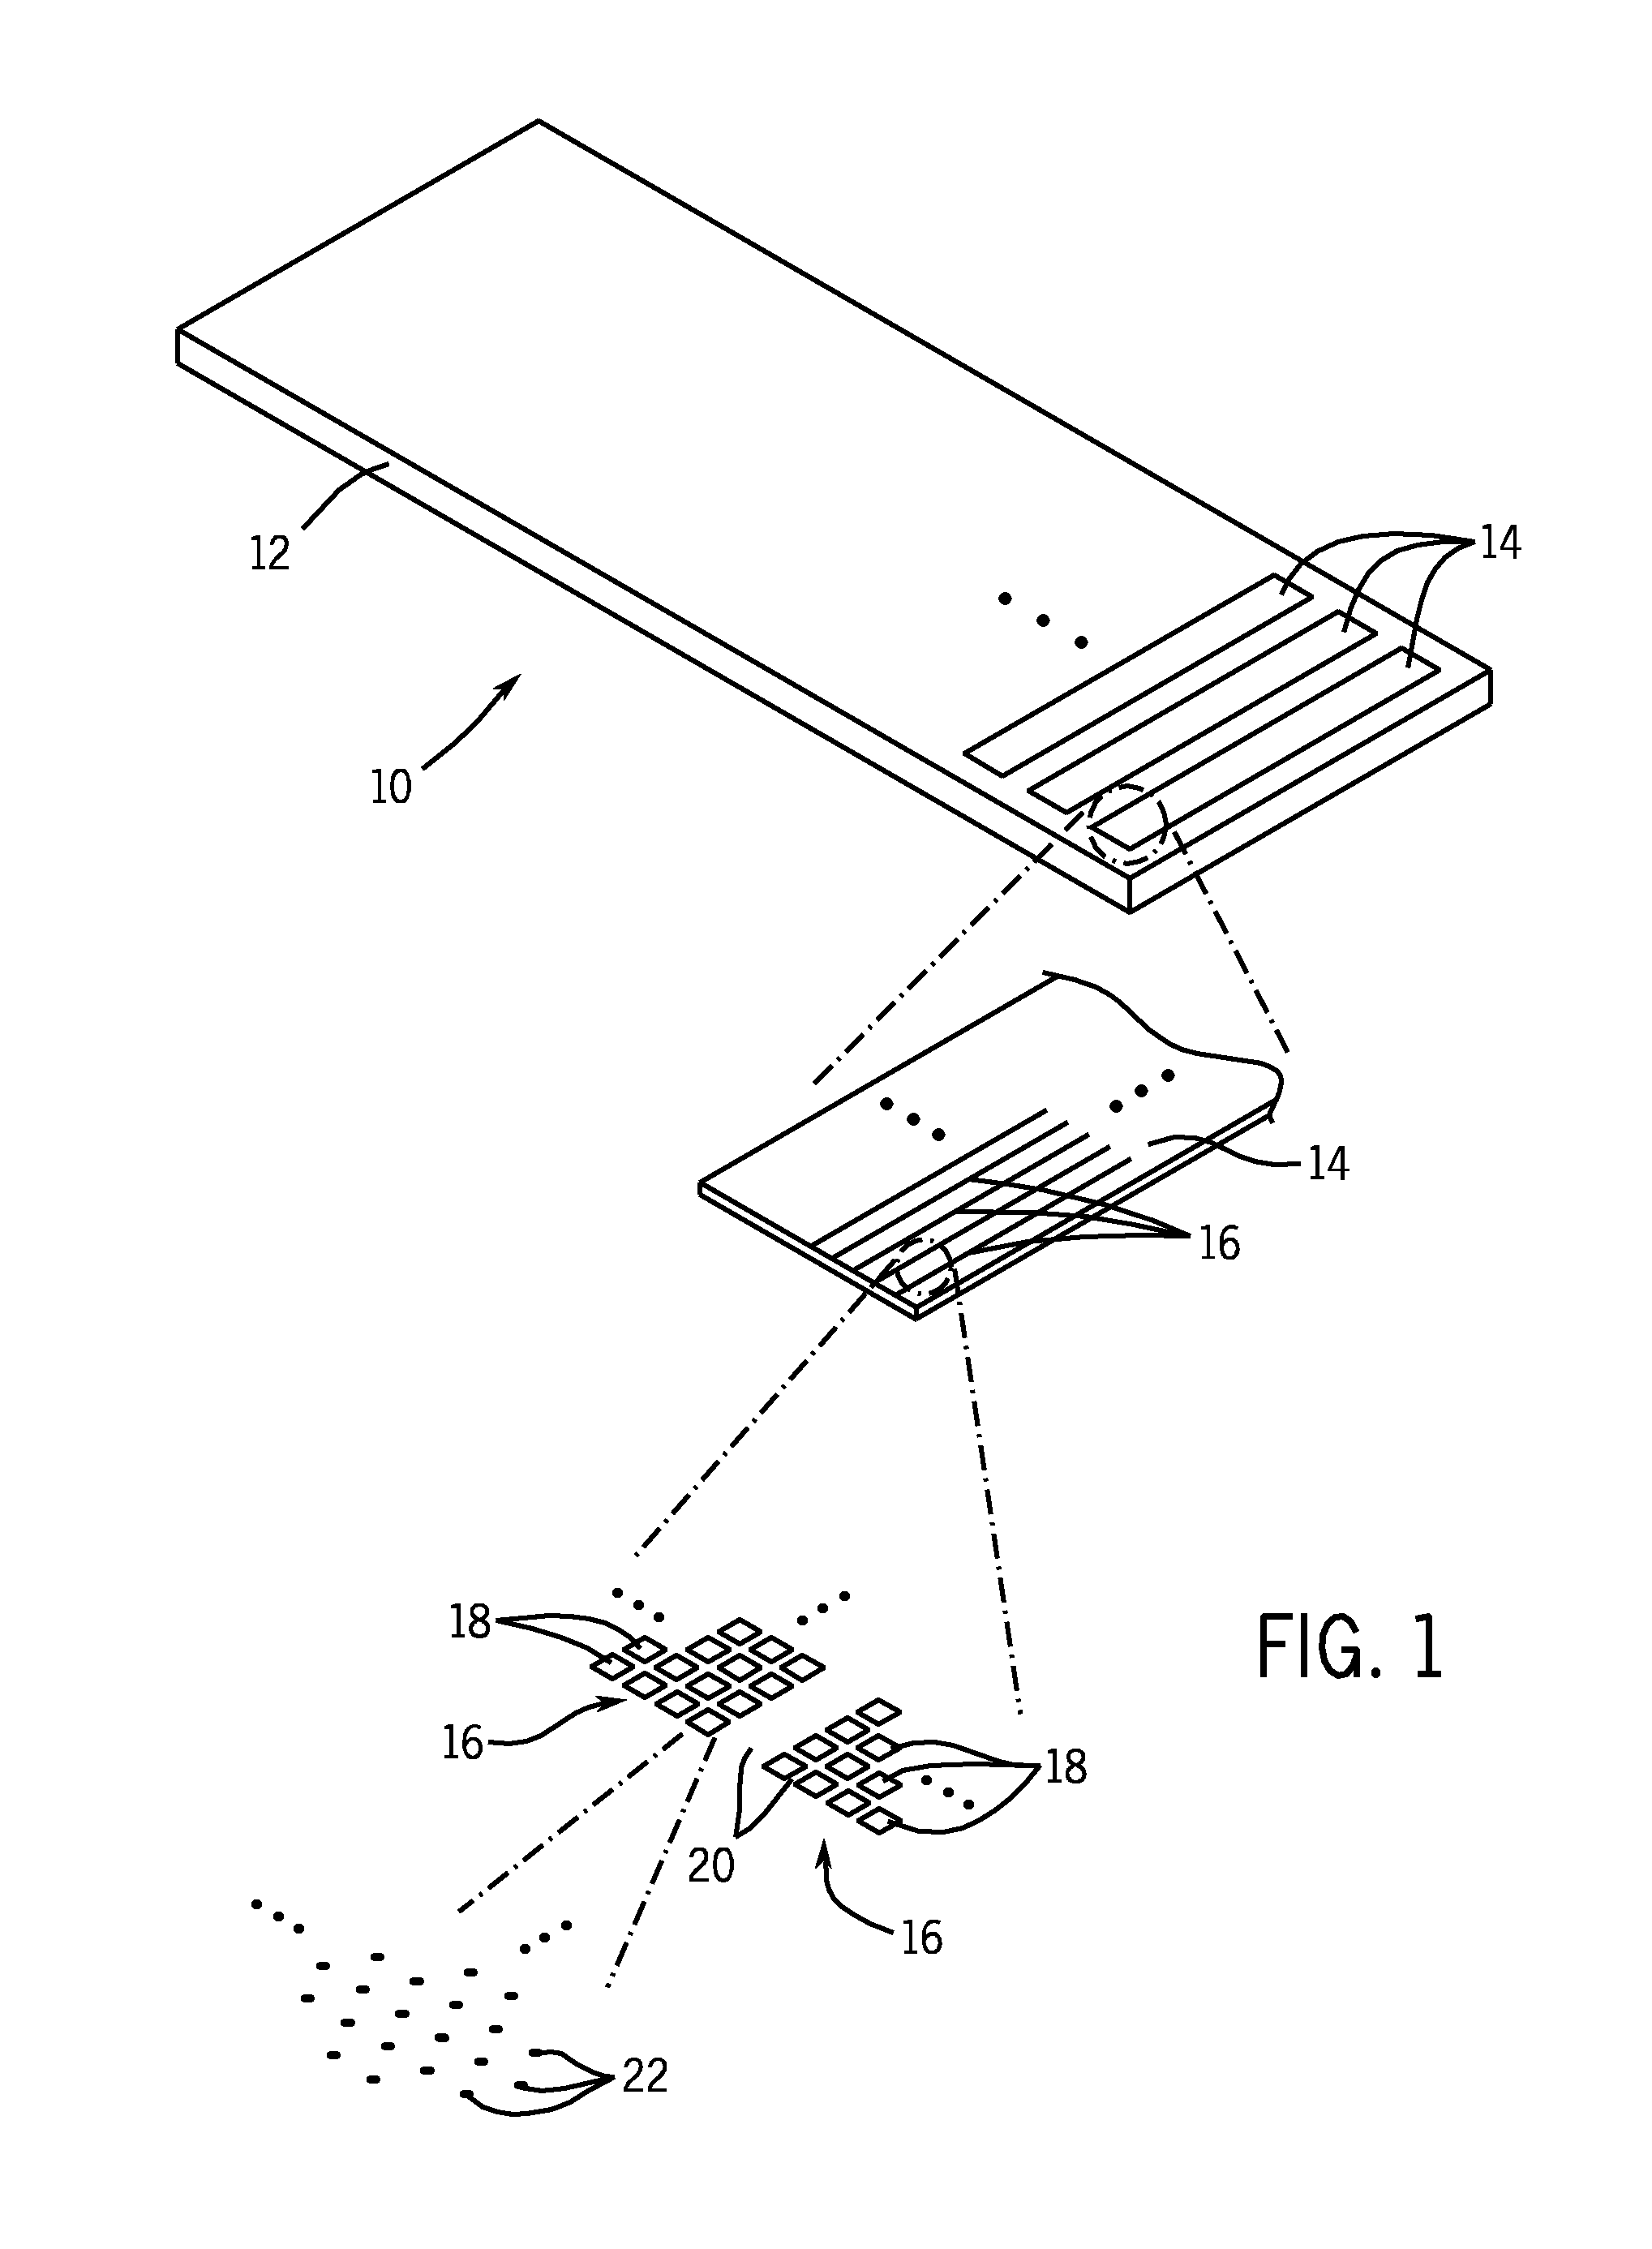 Microarray fabrication system and method